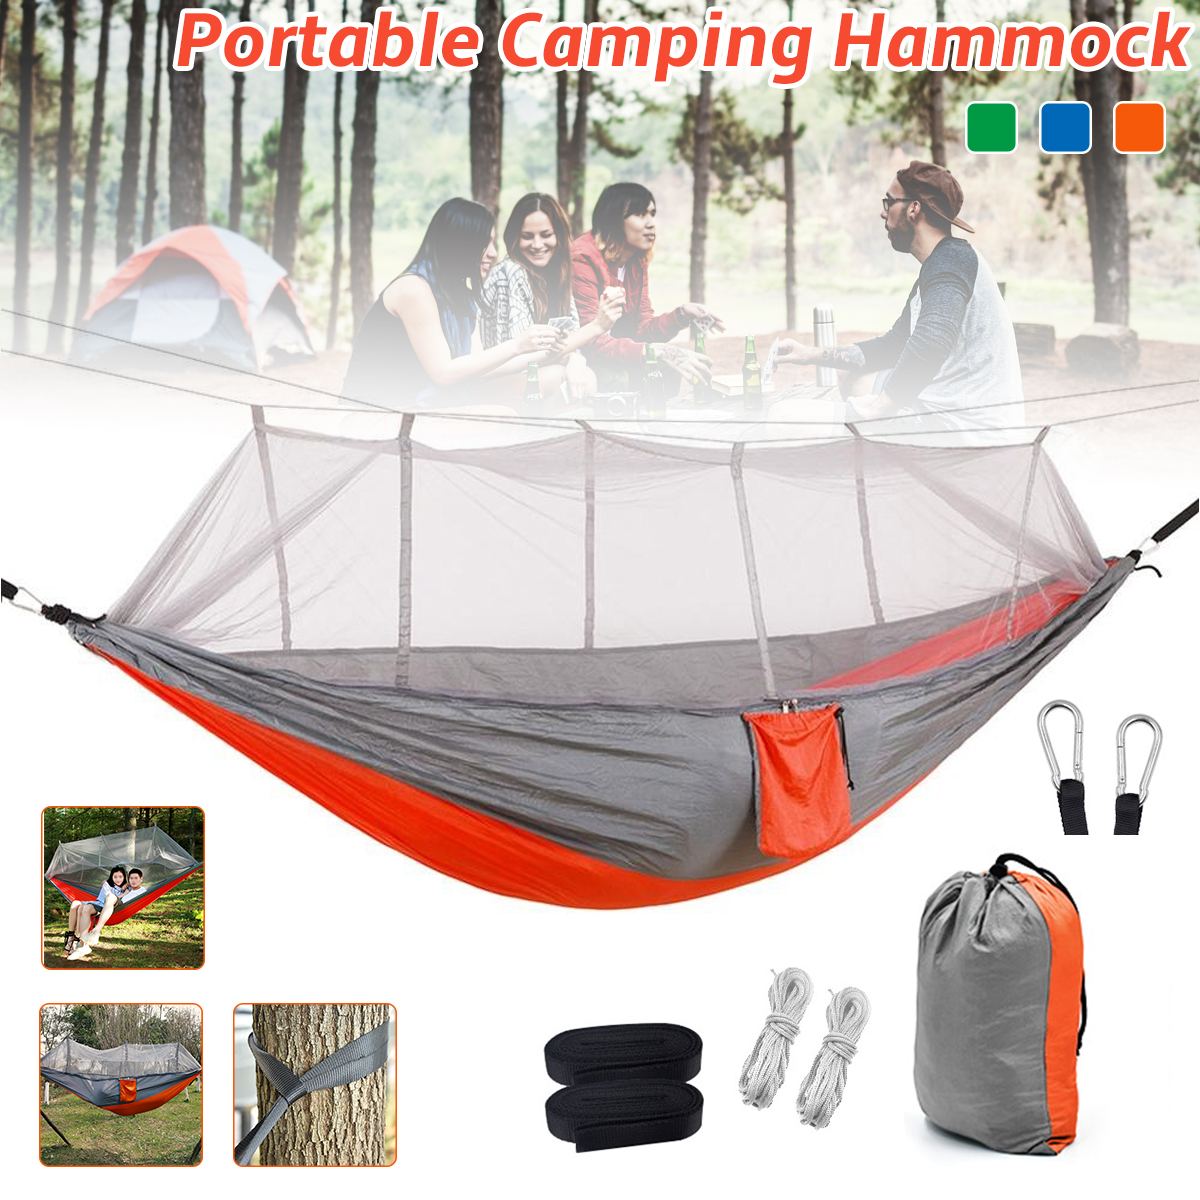 1-2-Person-Camping-Hammock-with-Mosquito-Net-Hanging-Bed-Sleeping-Swing-for-Outdoor-Hiking-Travel-Ga-1803189-1